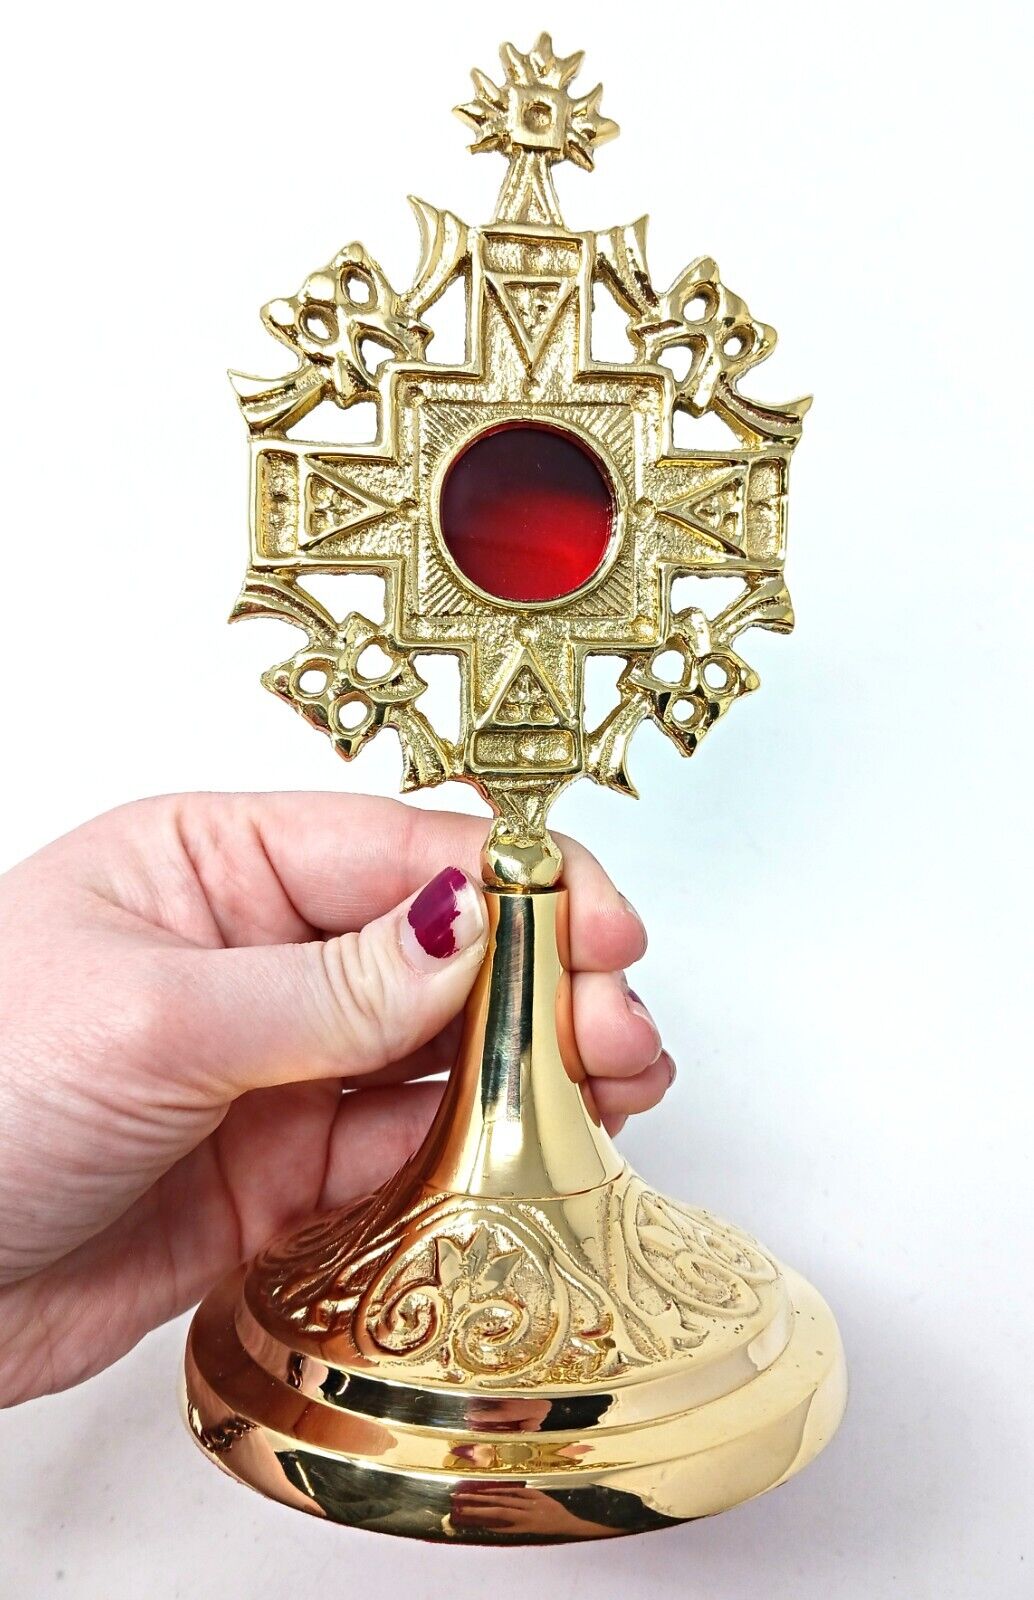 High Polished Brass Ornate Jerusalem Cross Reliquary for Church or Home 8 In